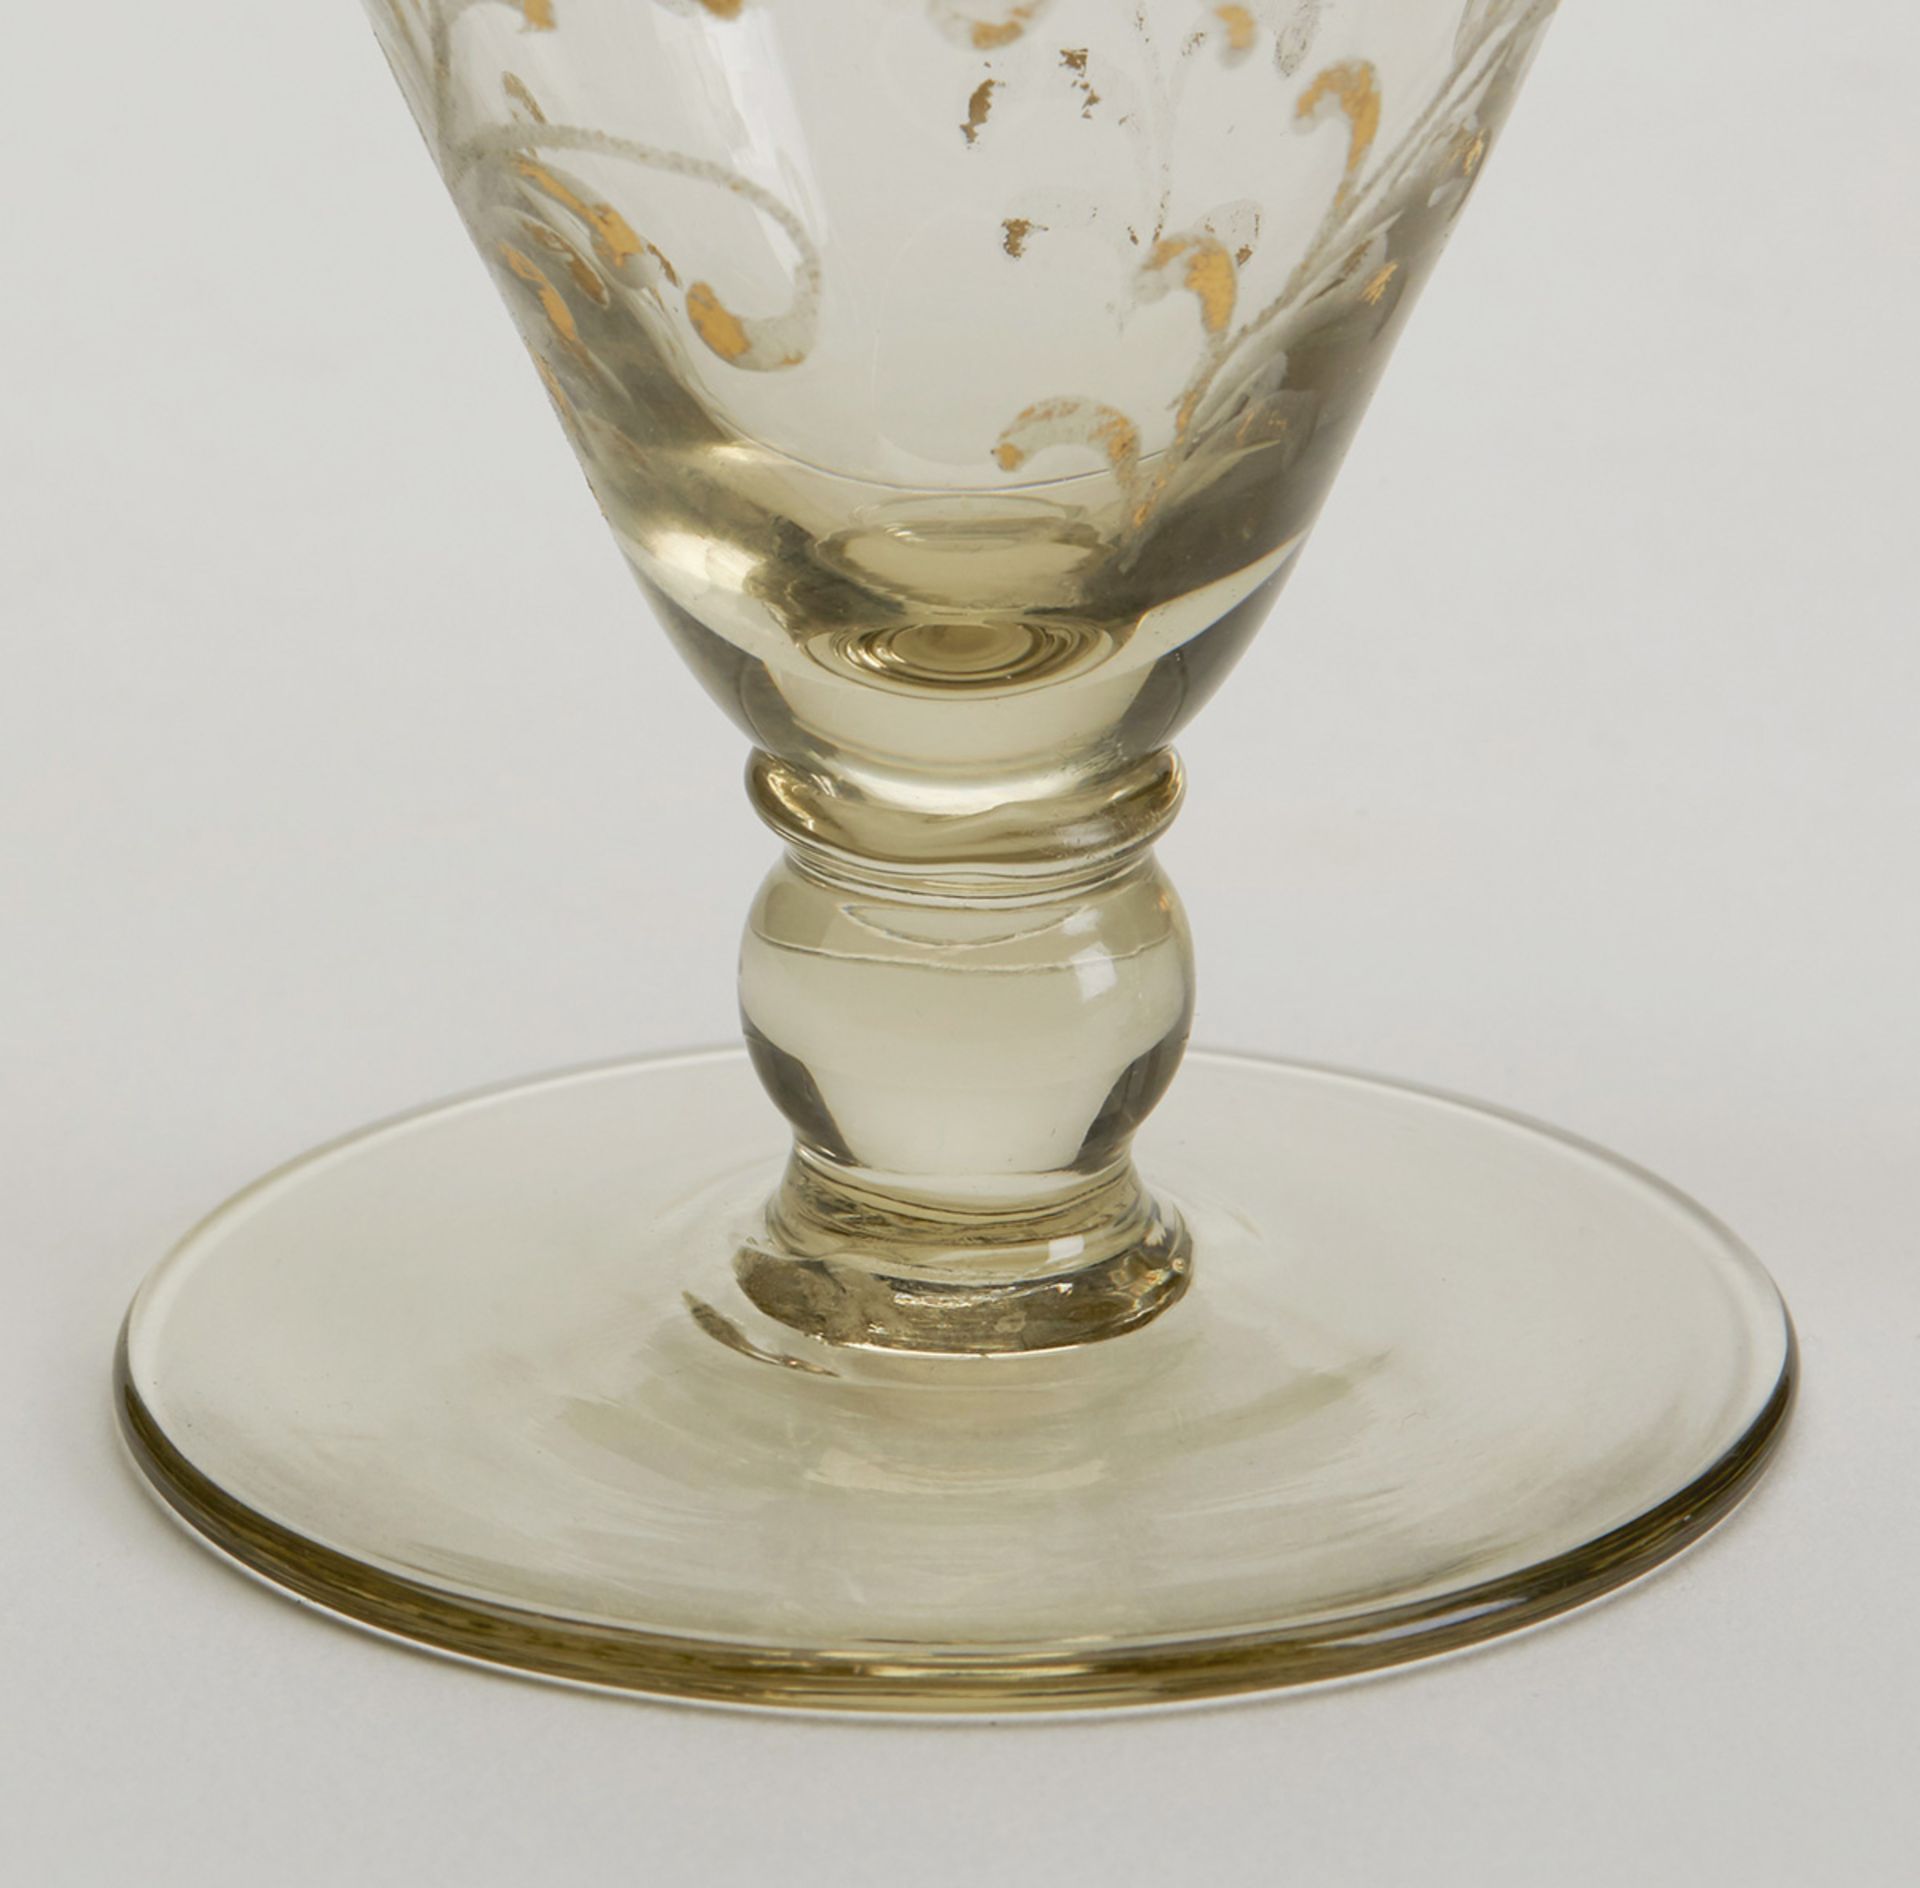 TWO CONTINENTAL ENGRAVED ETCHED WINE GLASSES 20TH C. - Image 3 of 6